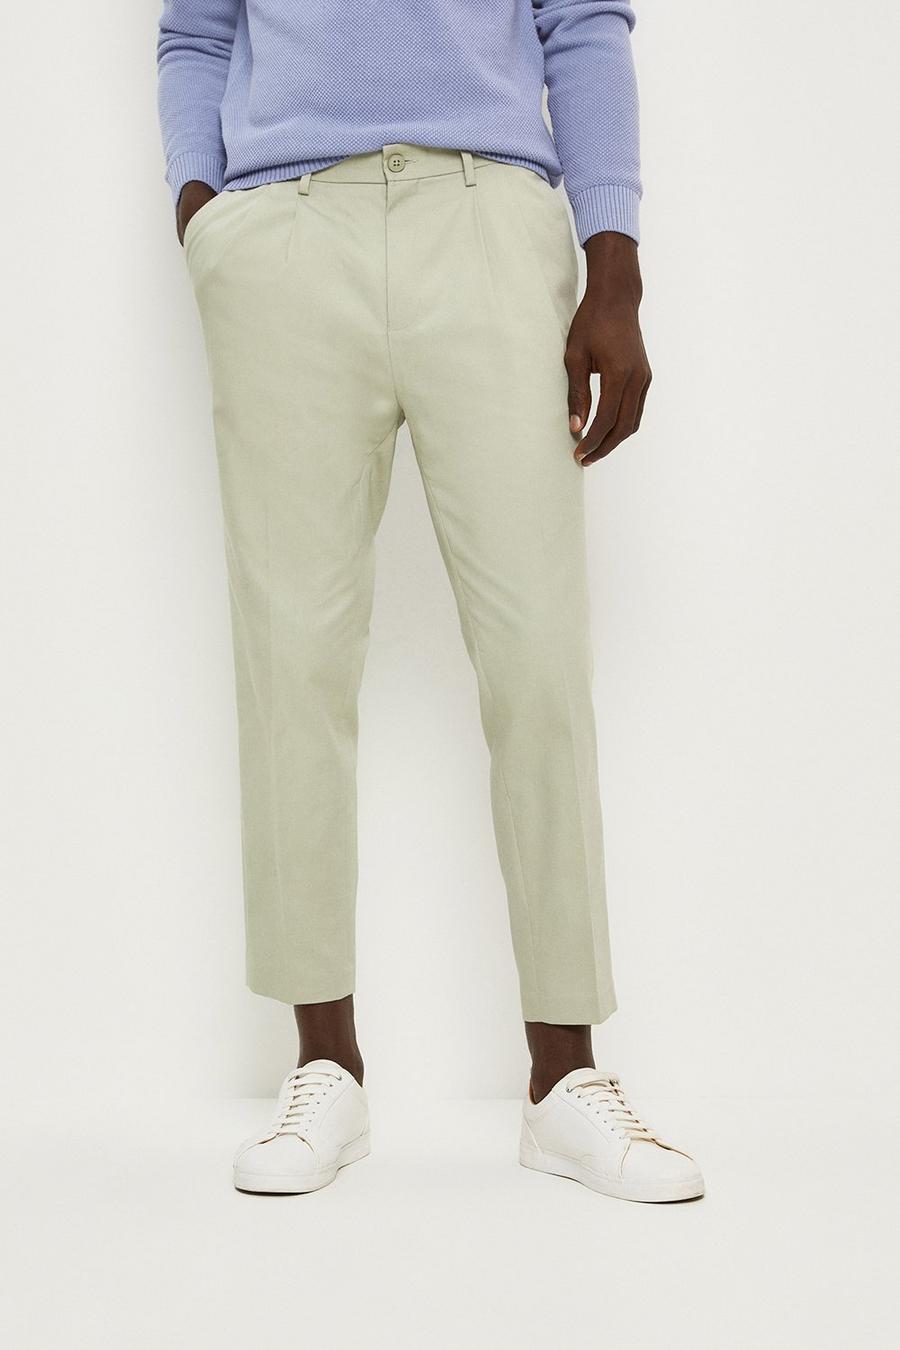 Slim Fit Light Green Smart Chino Trousers